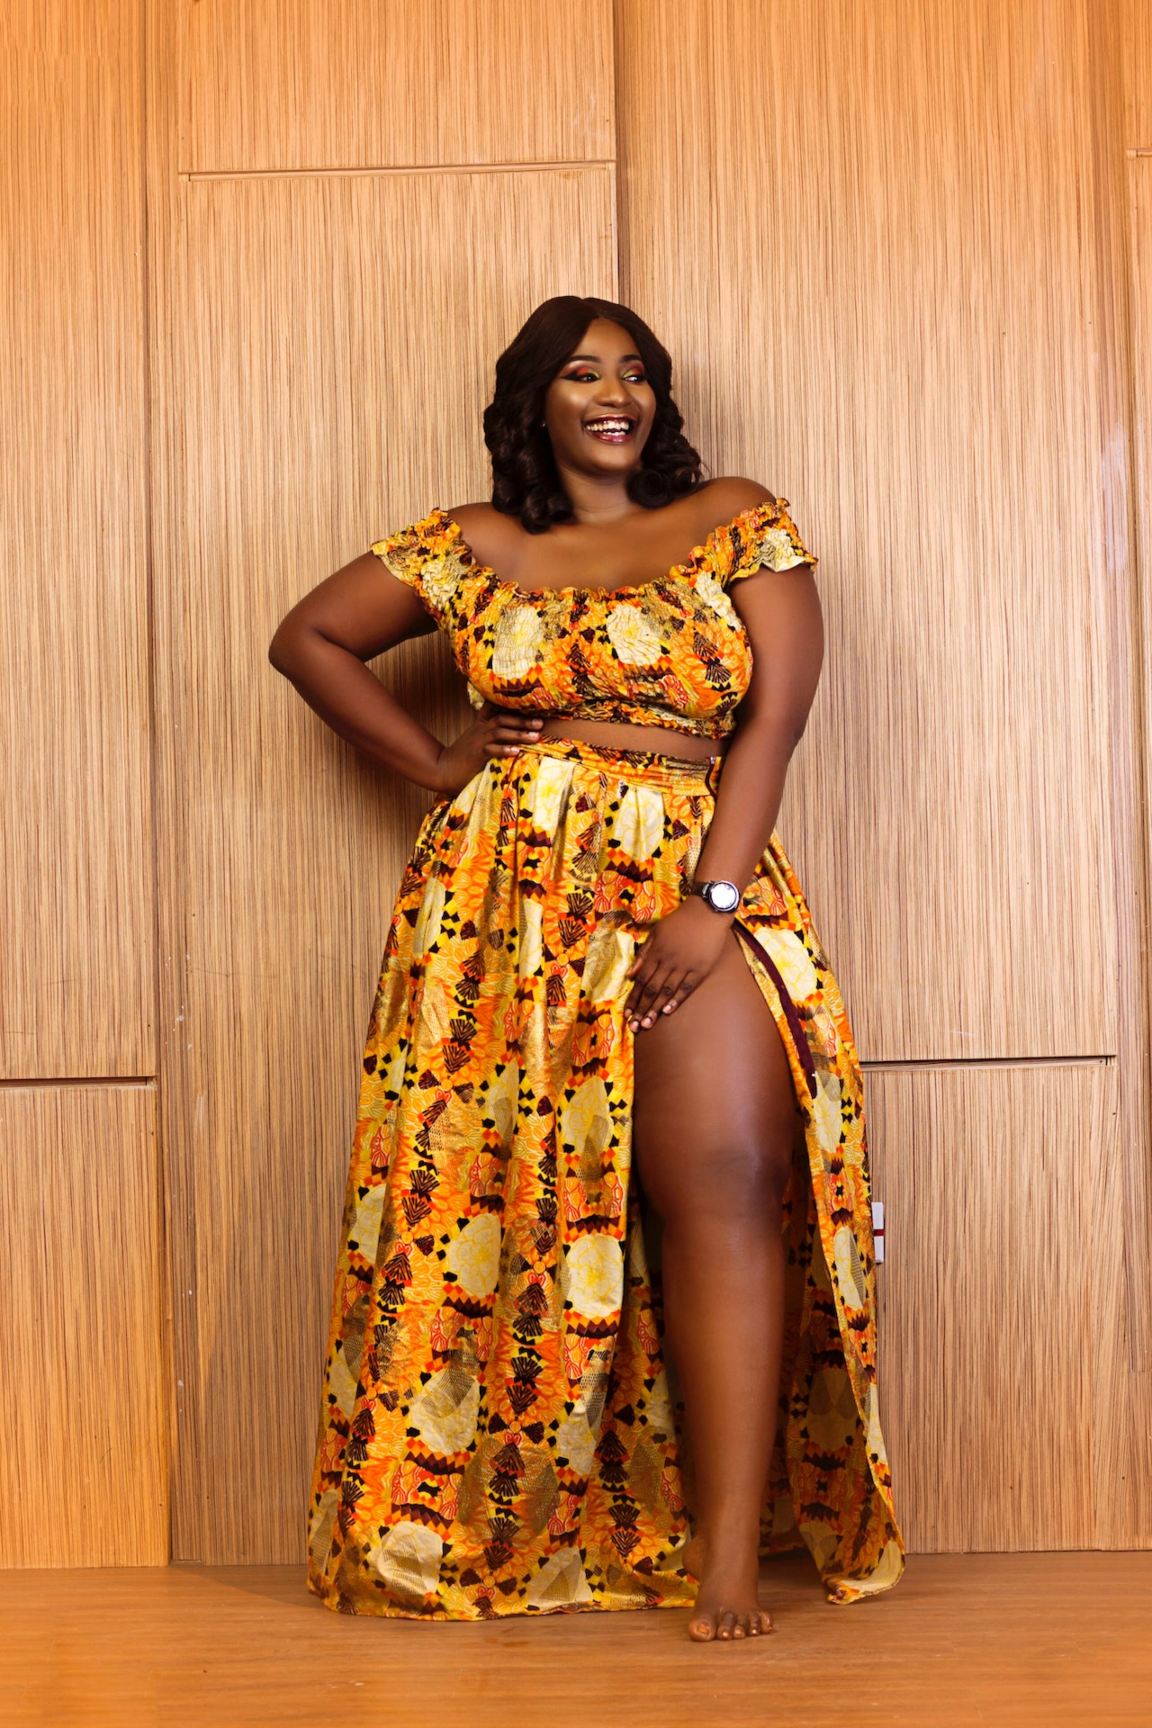 A plus-size woman wearing an outfit with bright prints